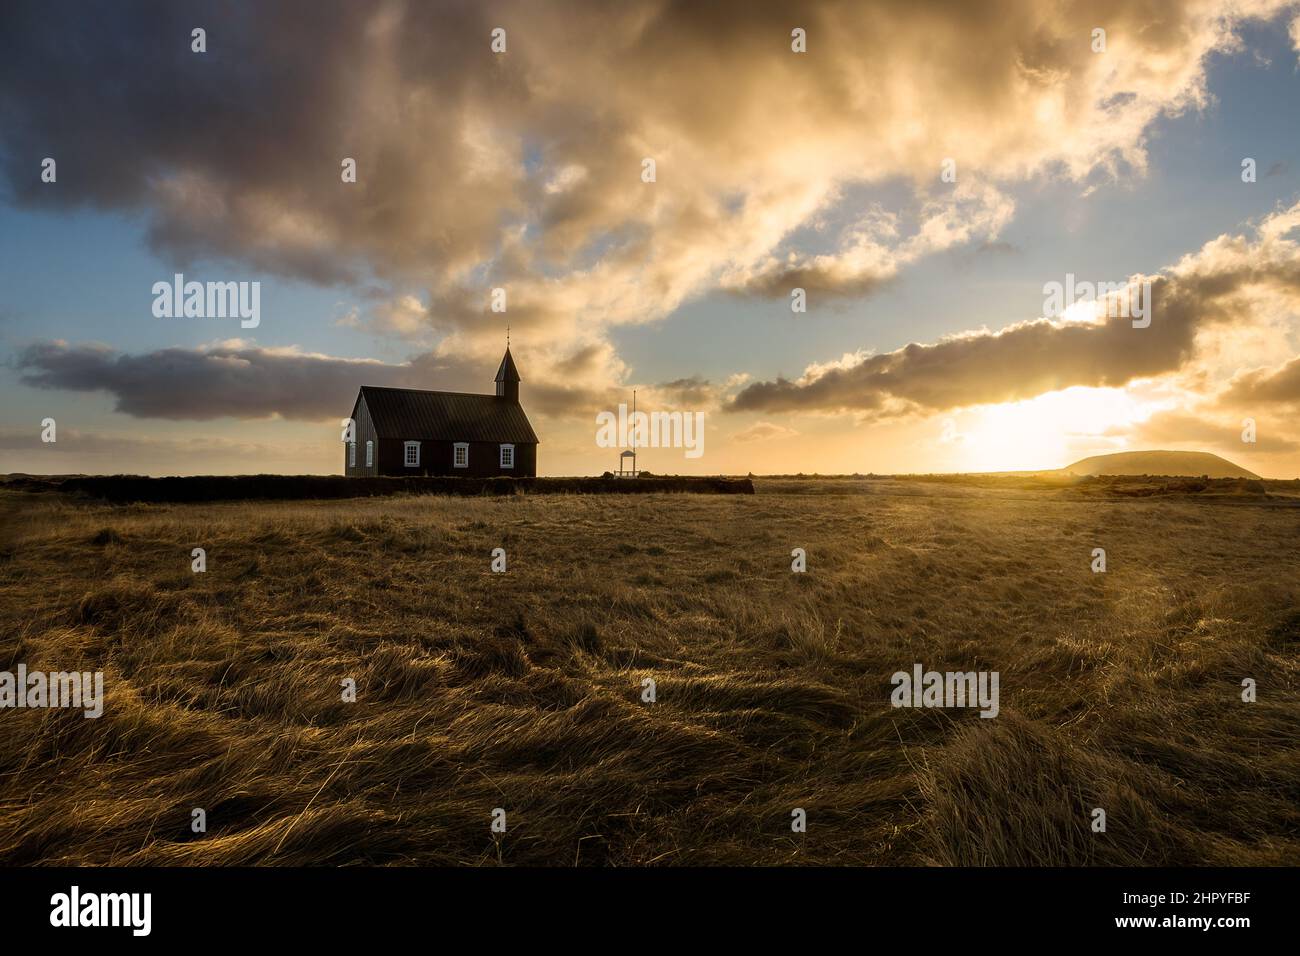 View of the Budakirkja, the famous black church in Budir in the Snaefelsness Peninsula, Iceland Stock Photo